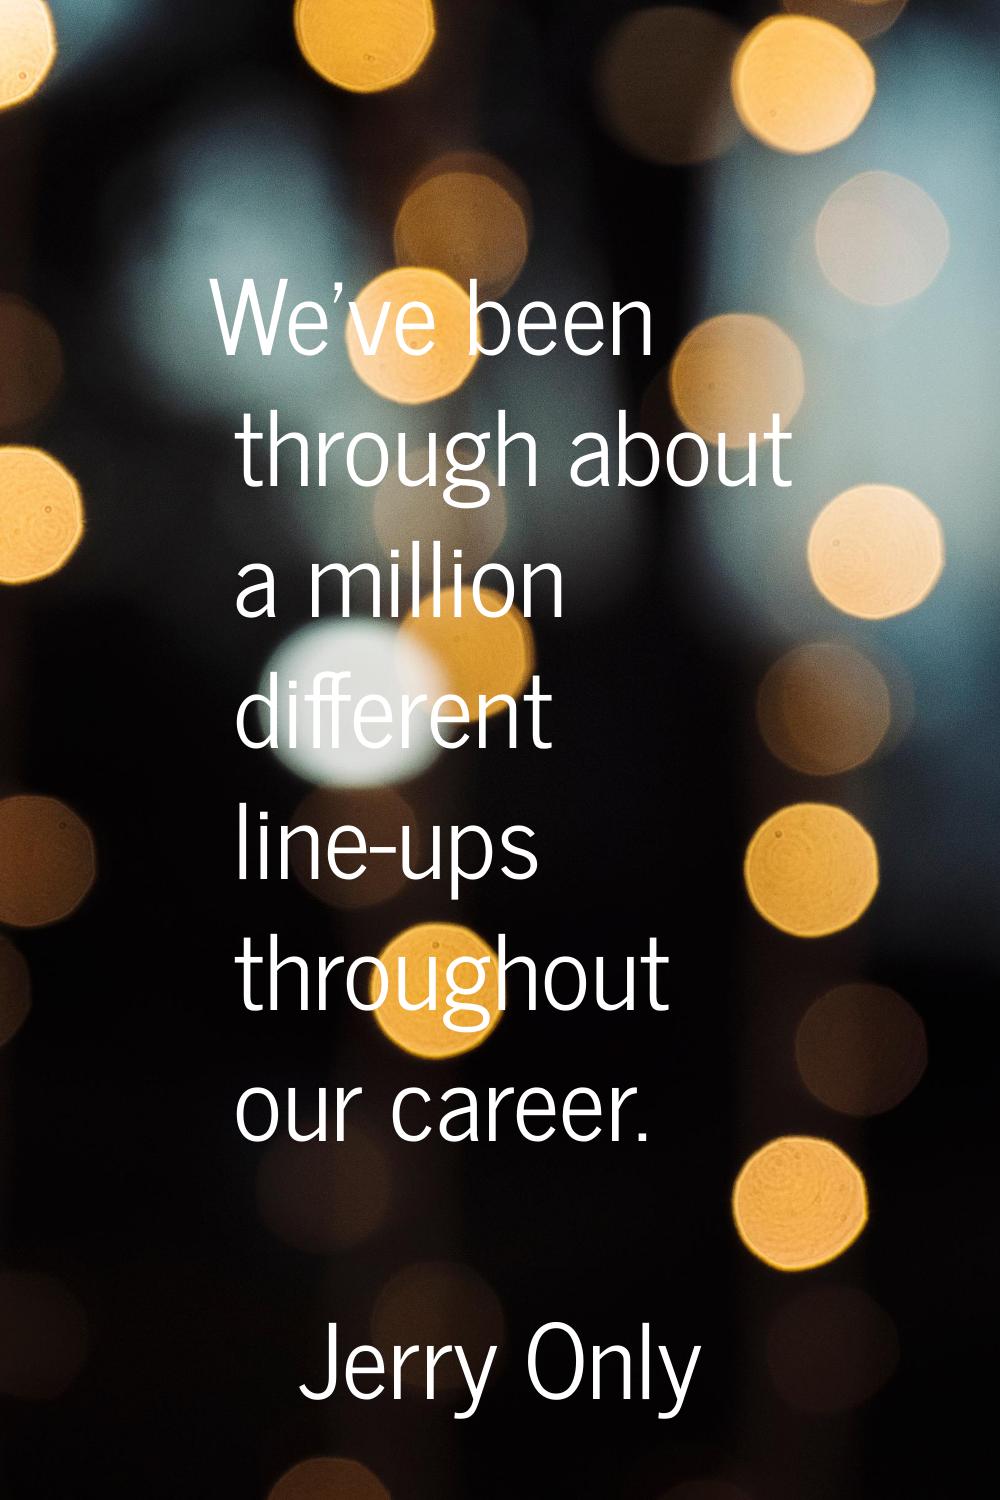 We've been through about a million different line-ups throughout our career.